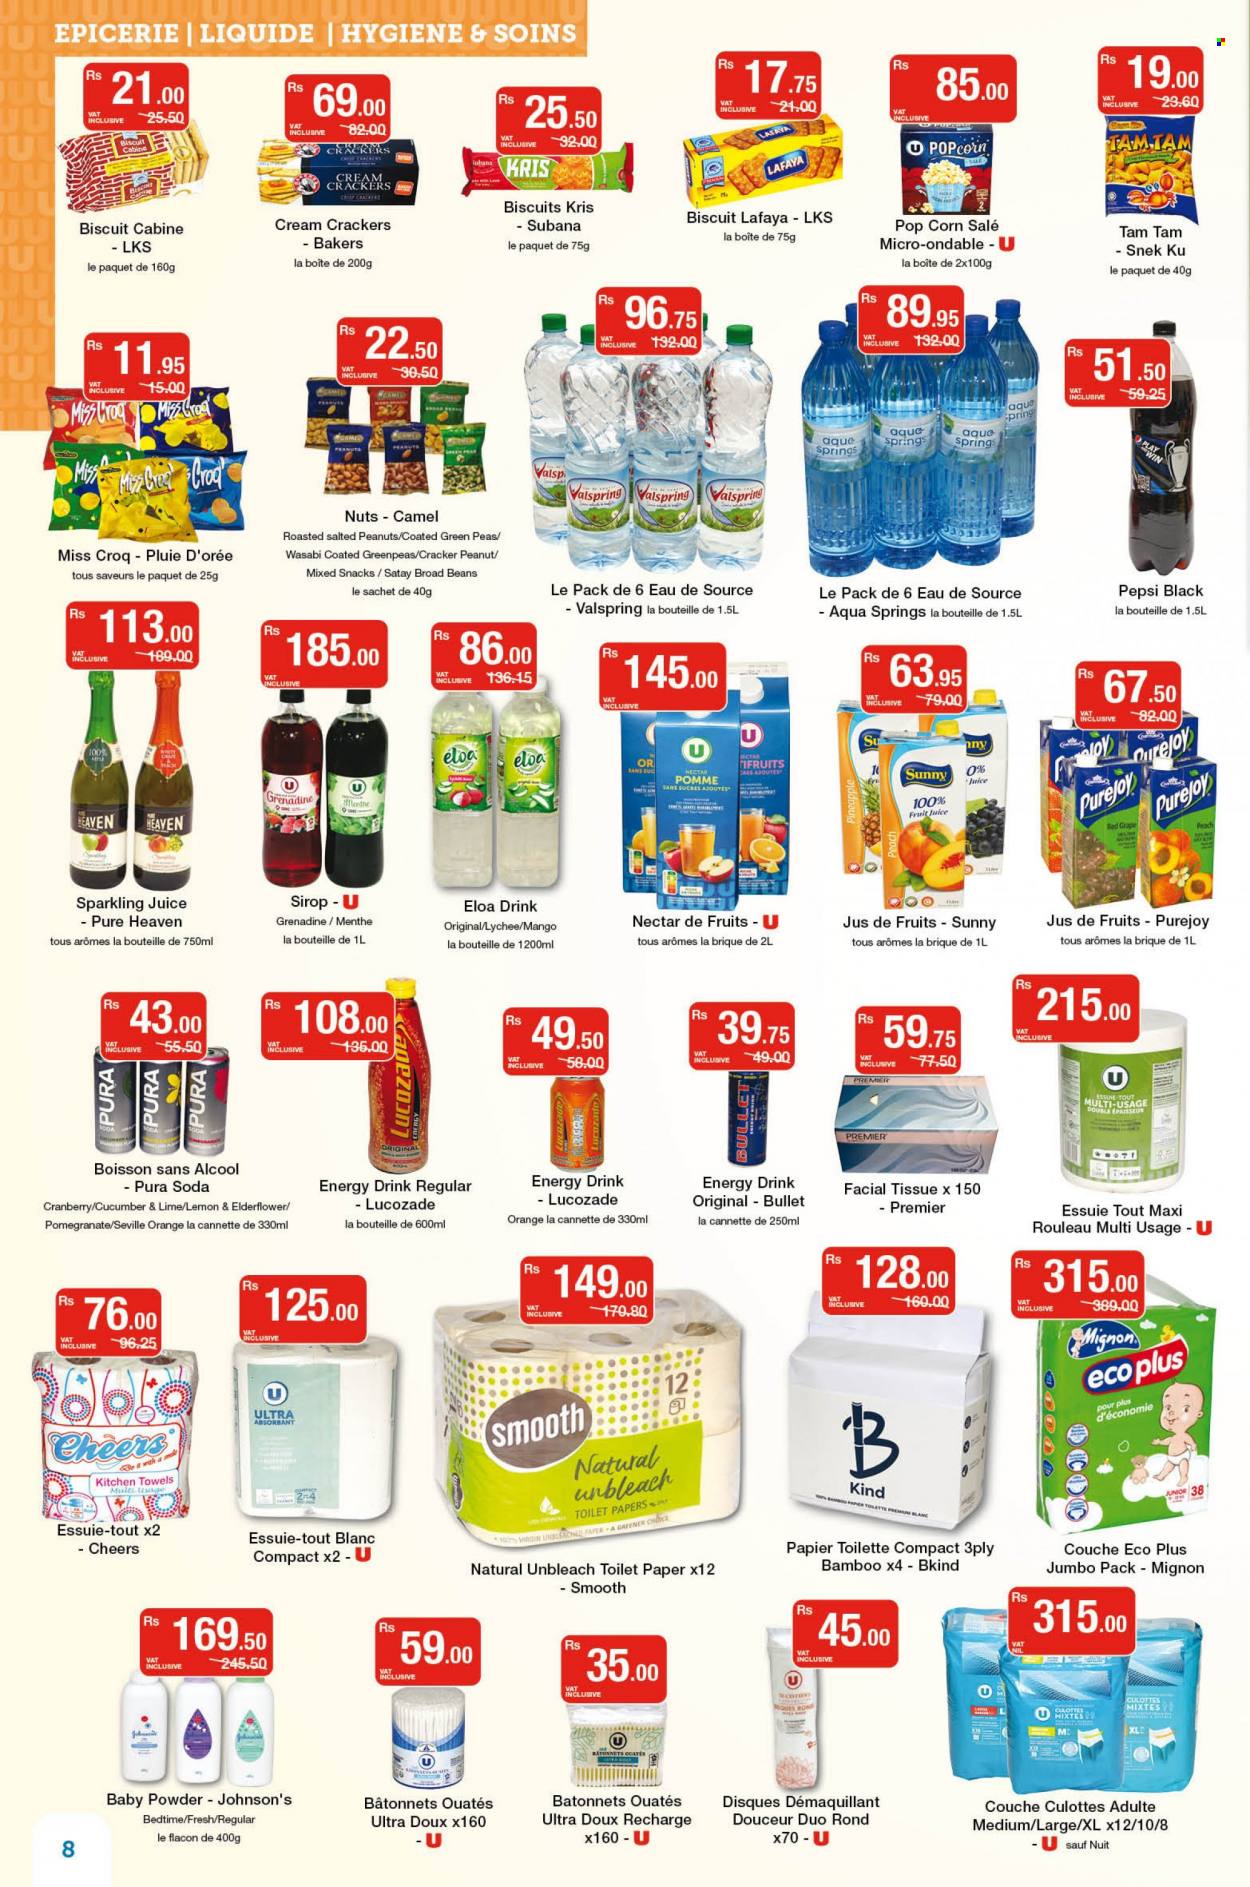 thumbnail - Super U Catalogue - 10.05.2022 - 22.05.2022 - Sales products - fava beans, peas, lychee, mango, pineapple, pomegranate, snack, crackers, biscuit, popcorn, oats, peanuts, Camel, Pepsi, juice, fruit juice, energy drink, Lucozade, sparkling juice, soda, grenadine, Ron Pelicano, Johnson's, baby powder, toilet paper, tissues, kitchen towels, Bakers, wasabi, oranges. Page 8.